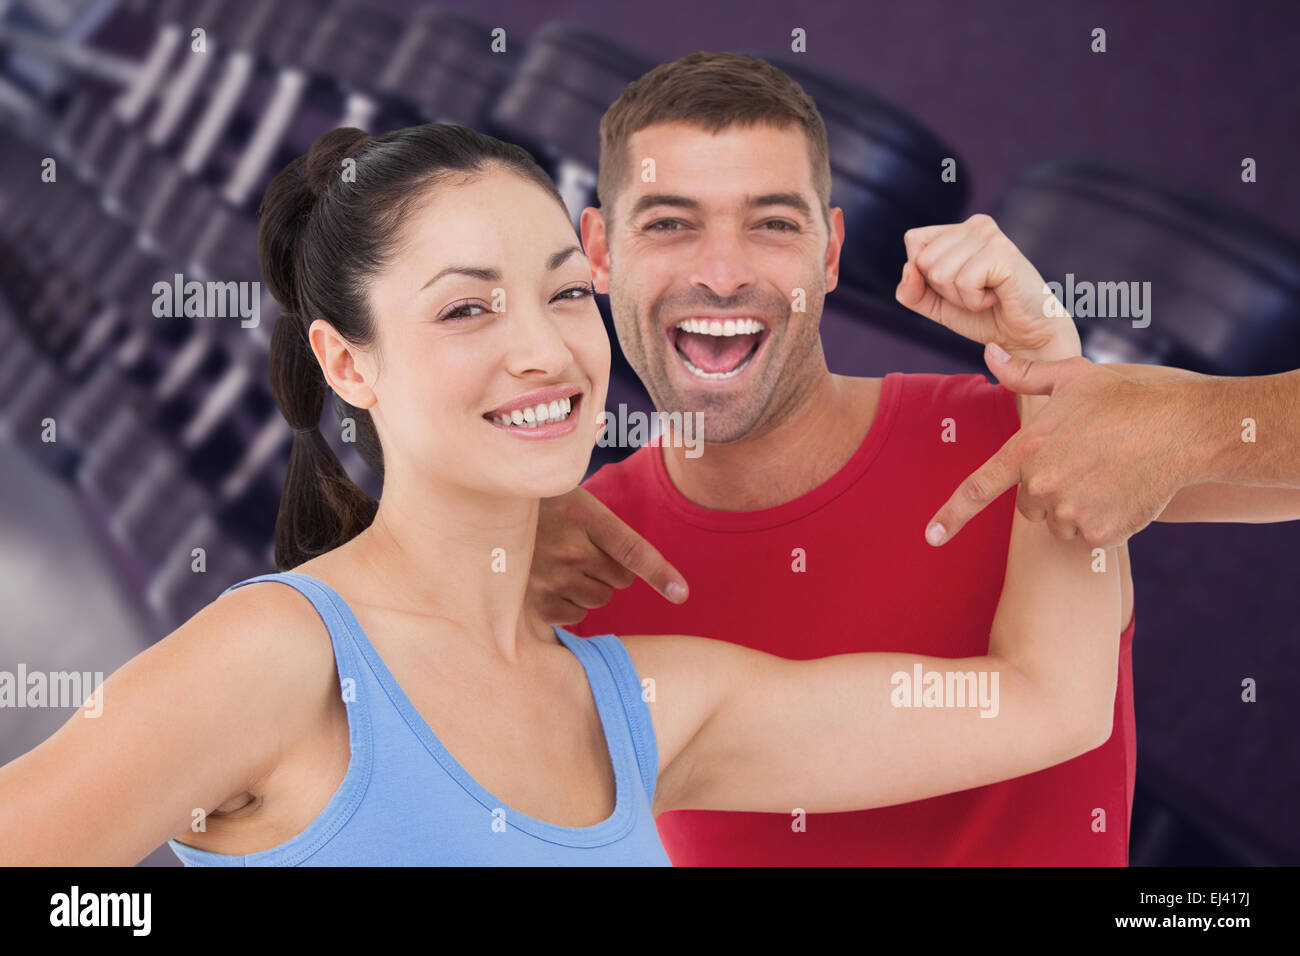 Composite image of fit woman and trainer smiling at camera Stock Photo